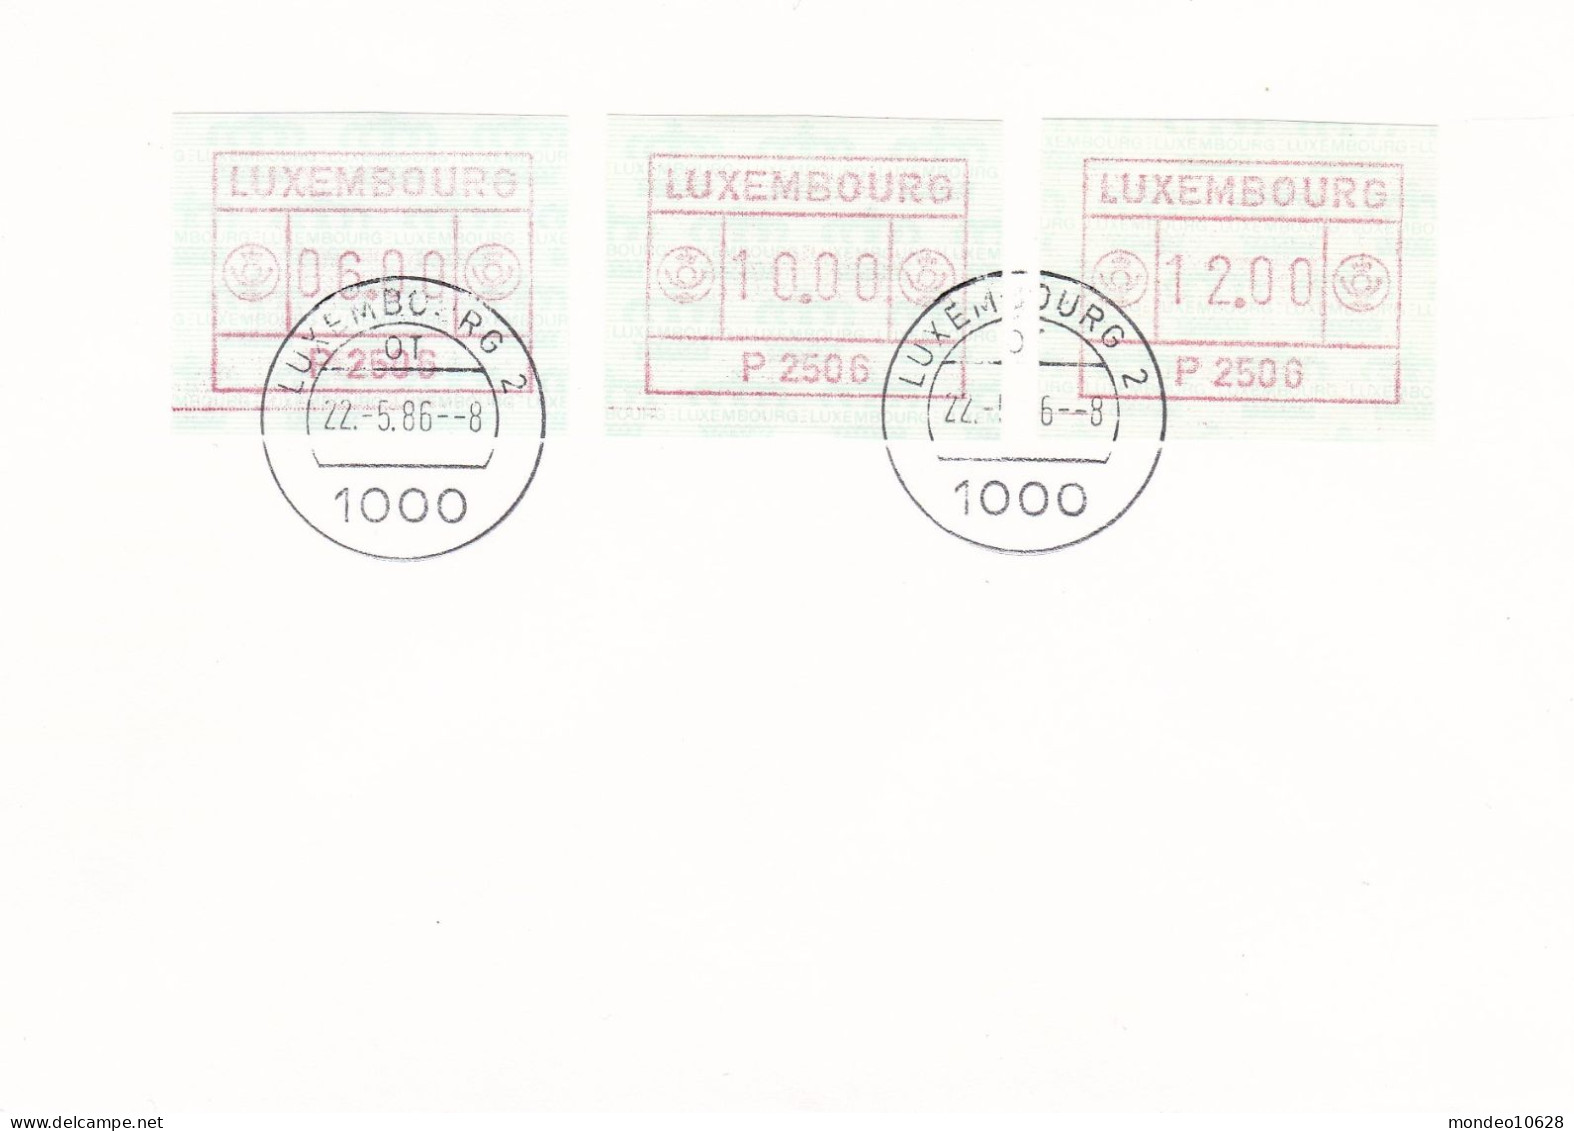 ATM Luxembourg, - Ausgabe 22.05.1986 - FDC Automat 2506 Luxembourg 2 (5) - Postage Labels